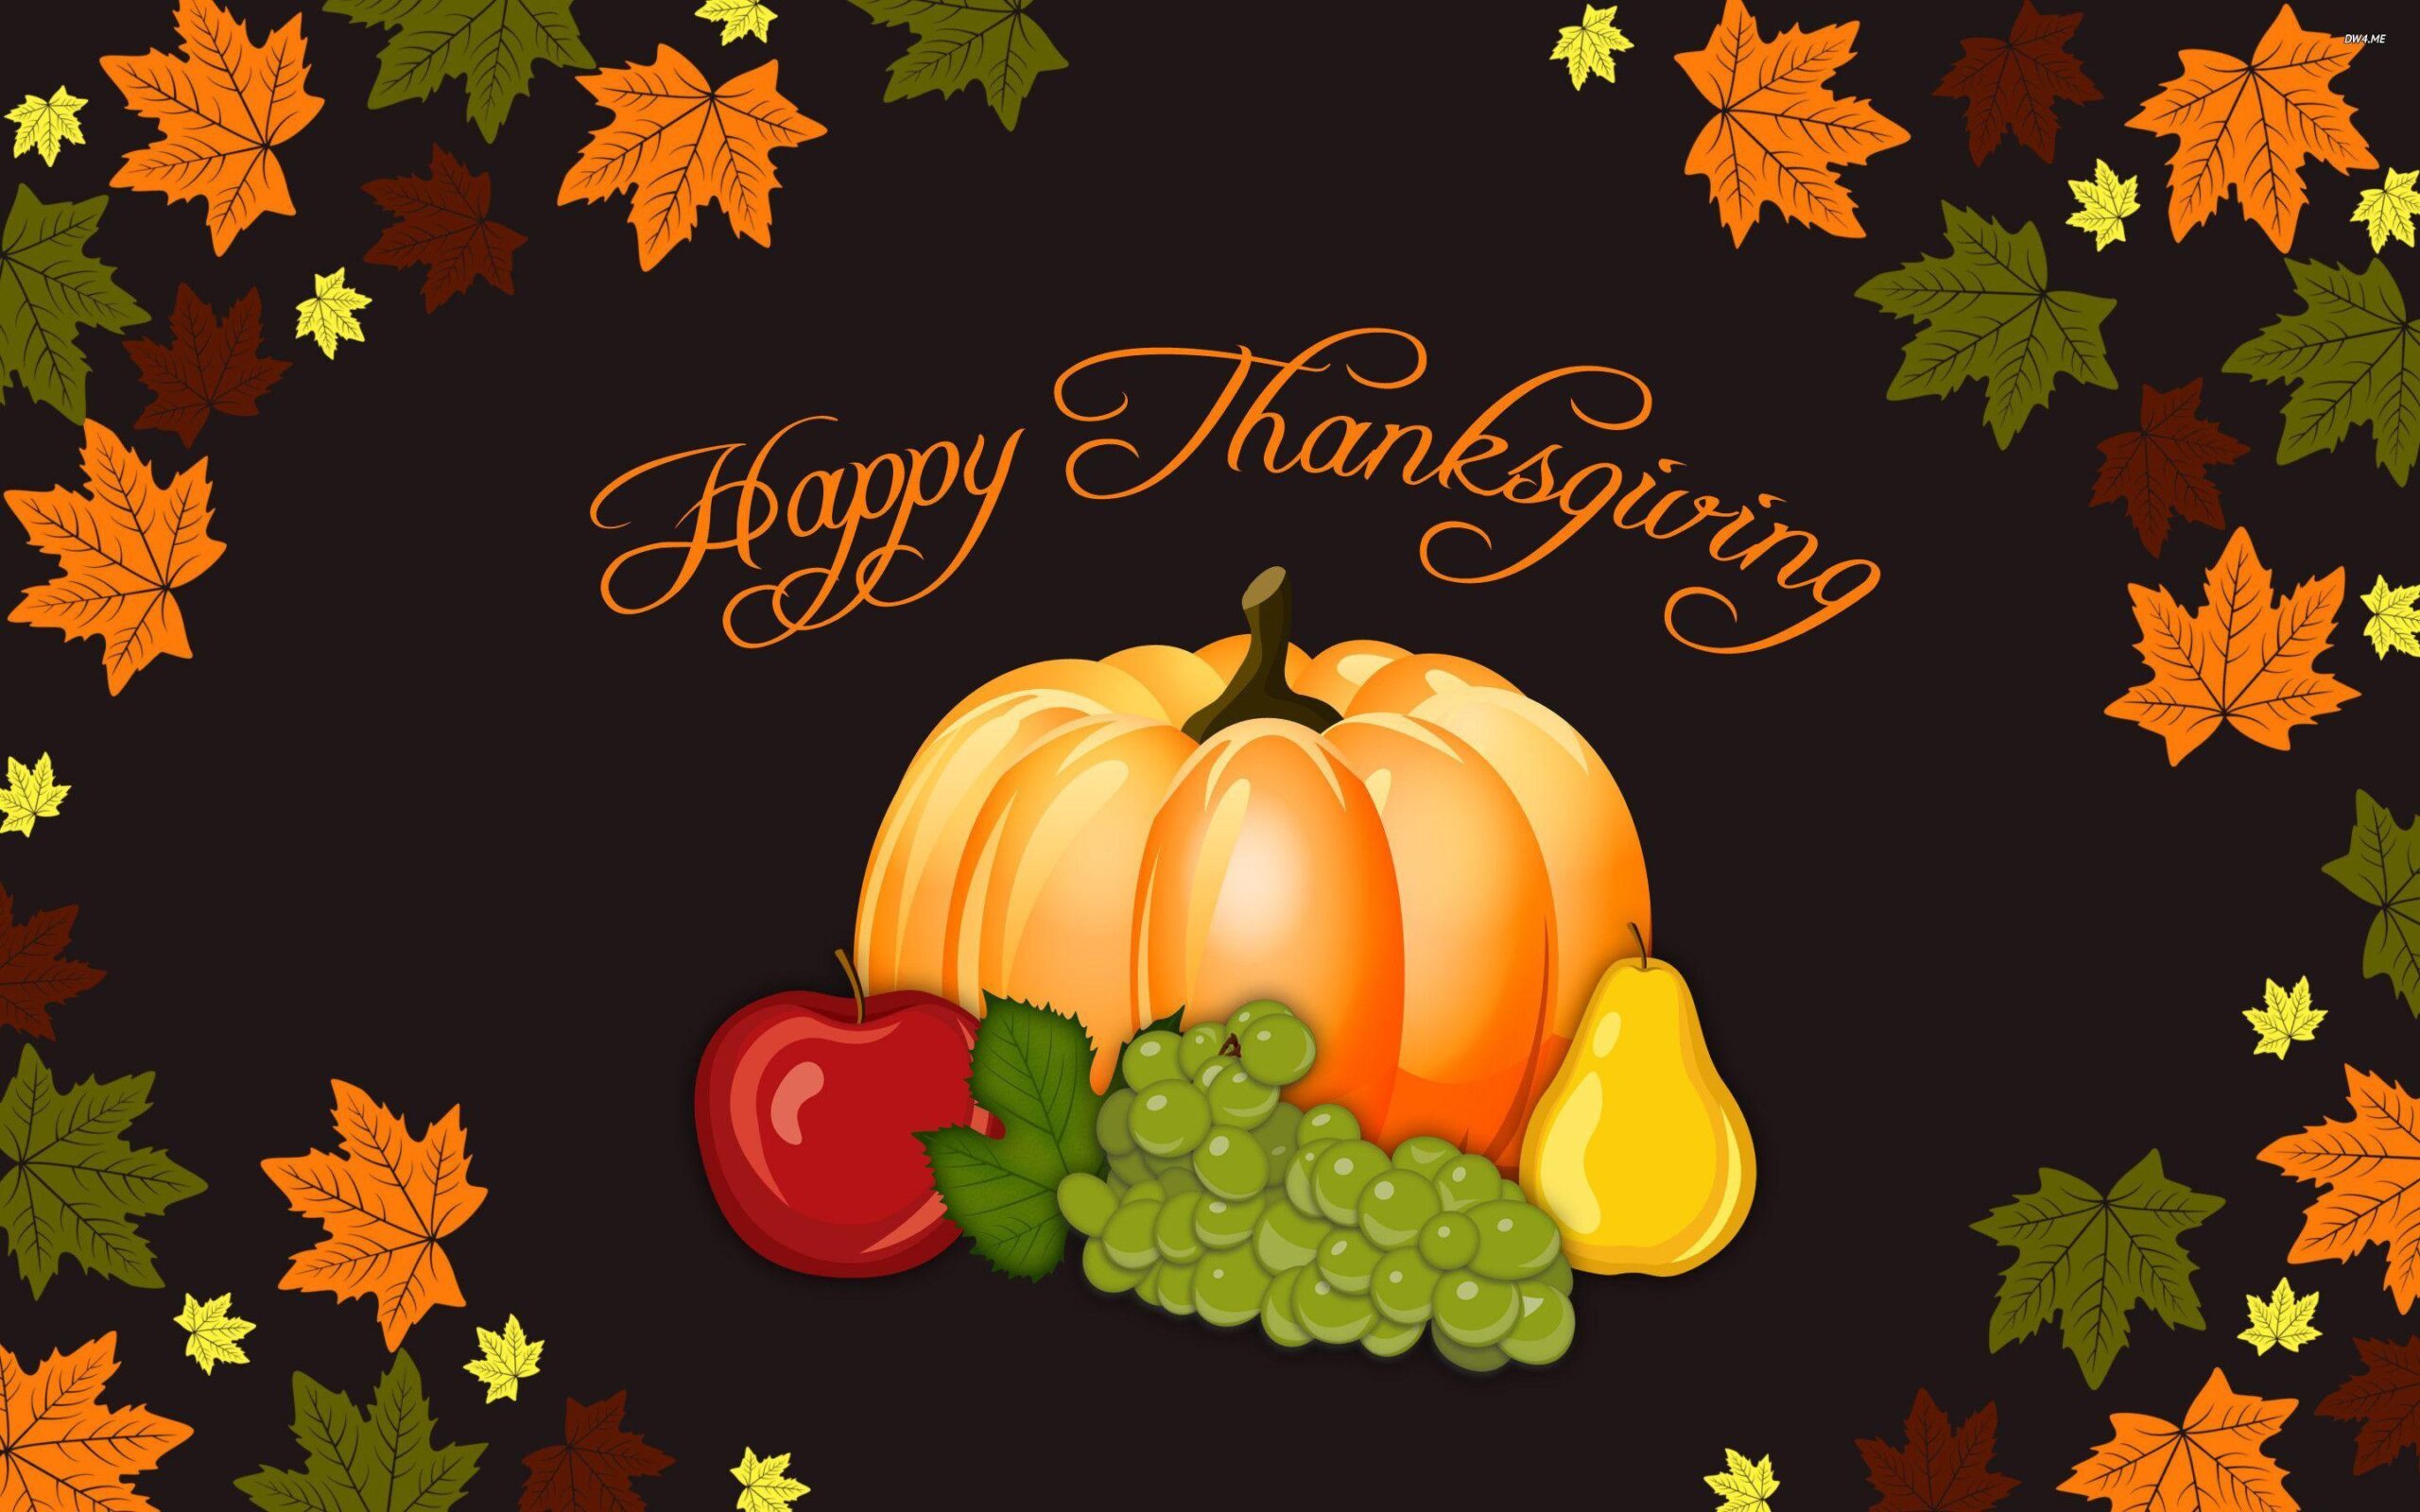 Wallpapers For – Happy Thanksgiving Wallpapers Hd